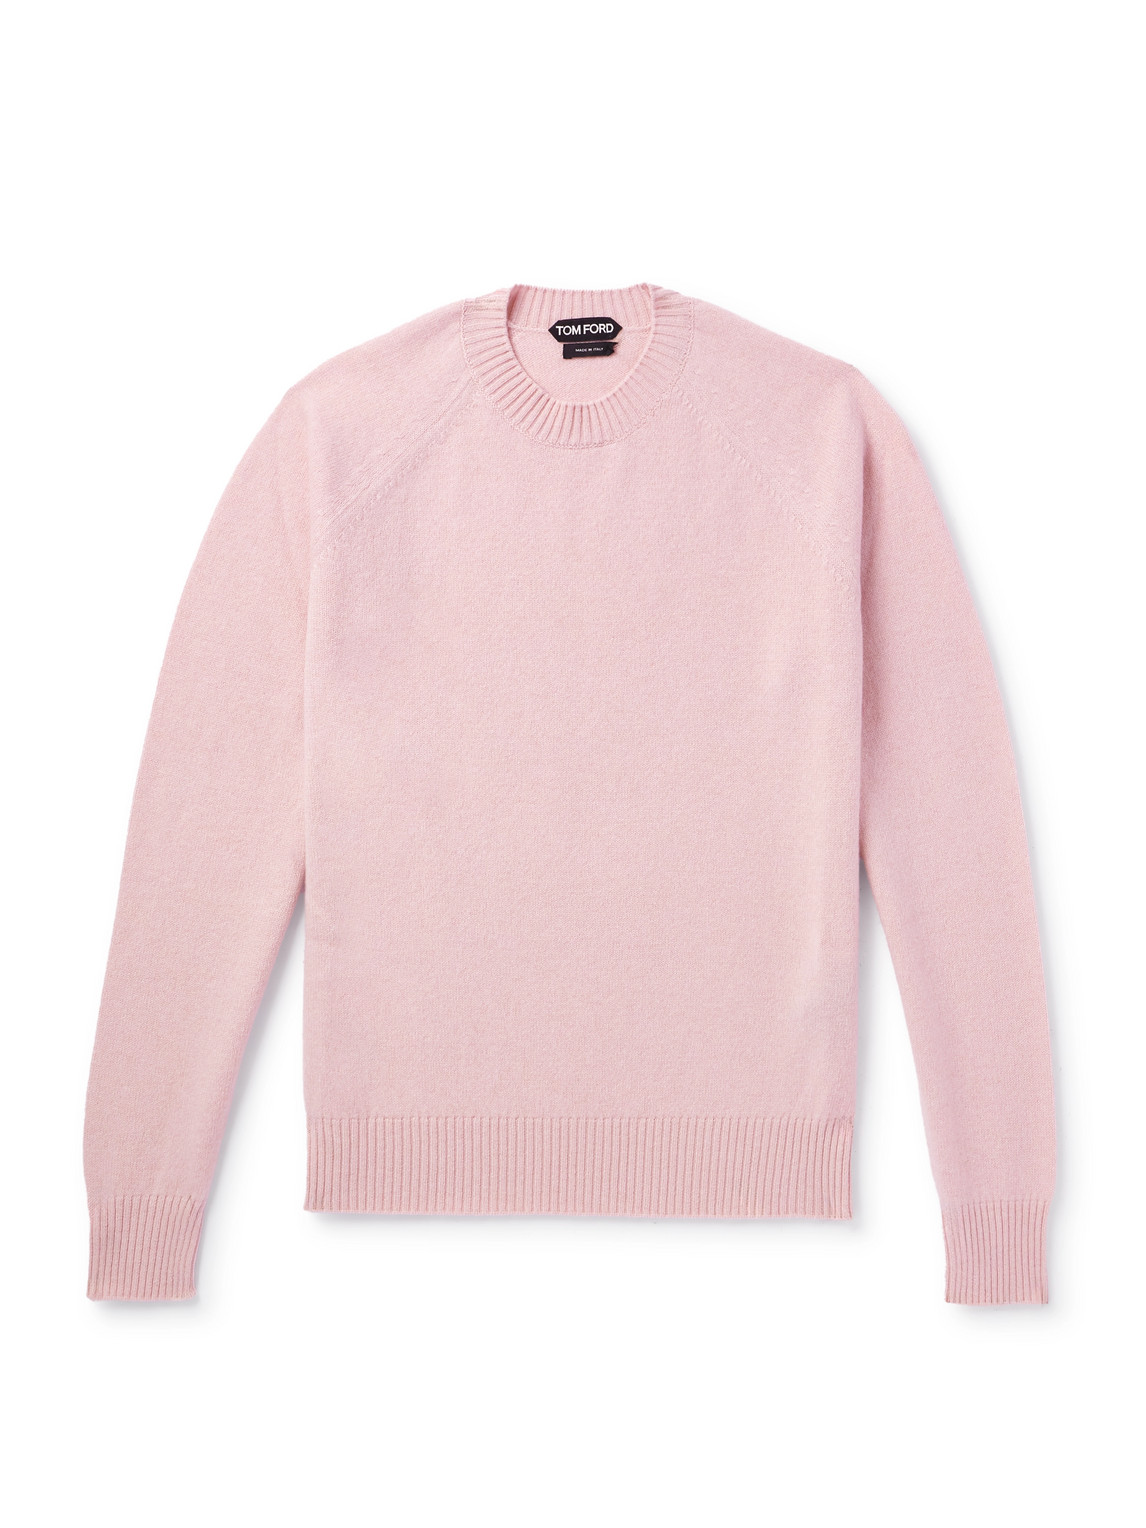 TOM FORD - Wool and Cashmere-Blend Sweater - Men - Pink - IT 56 von TOM FORD